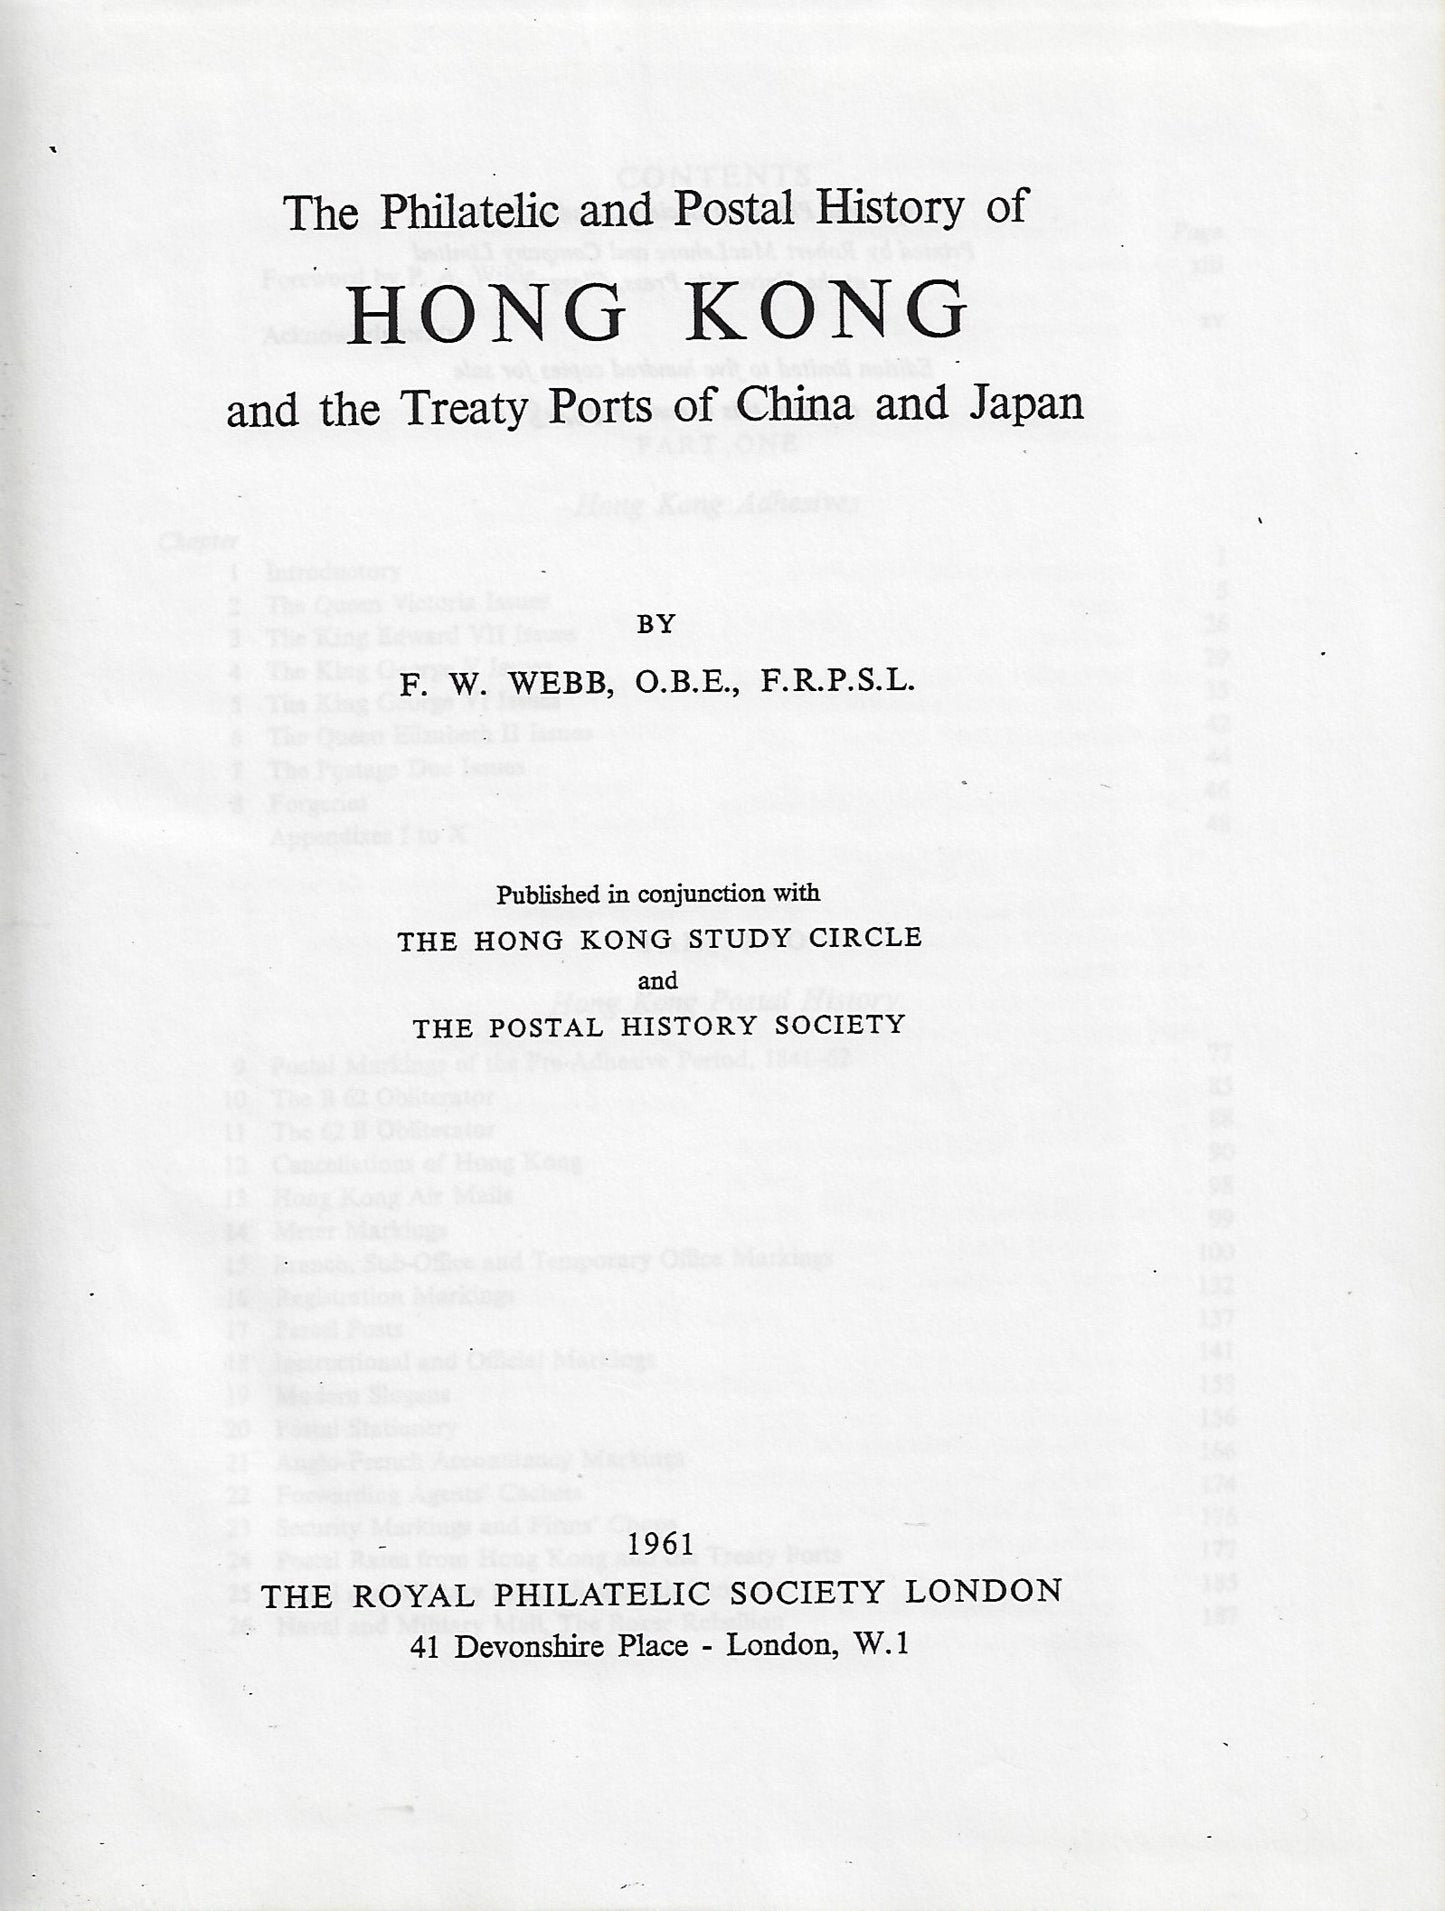 the philatelic and postal history of Hong Kong and the treaty ports of china and japan